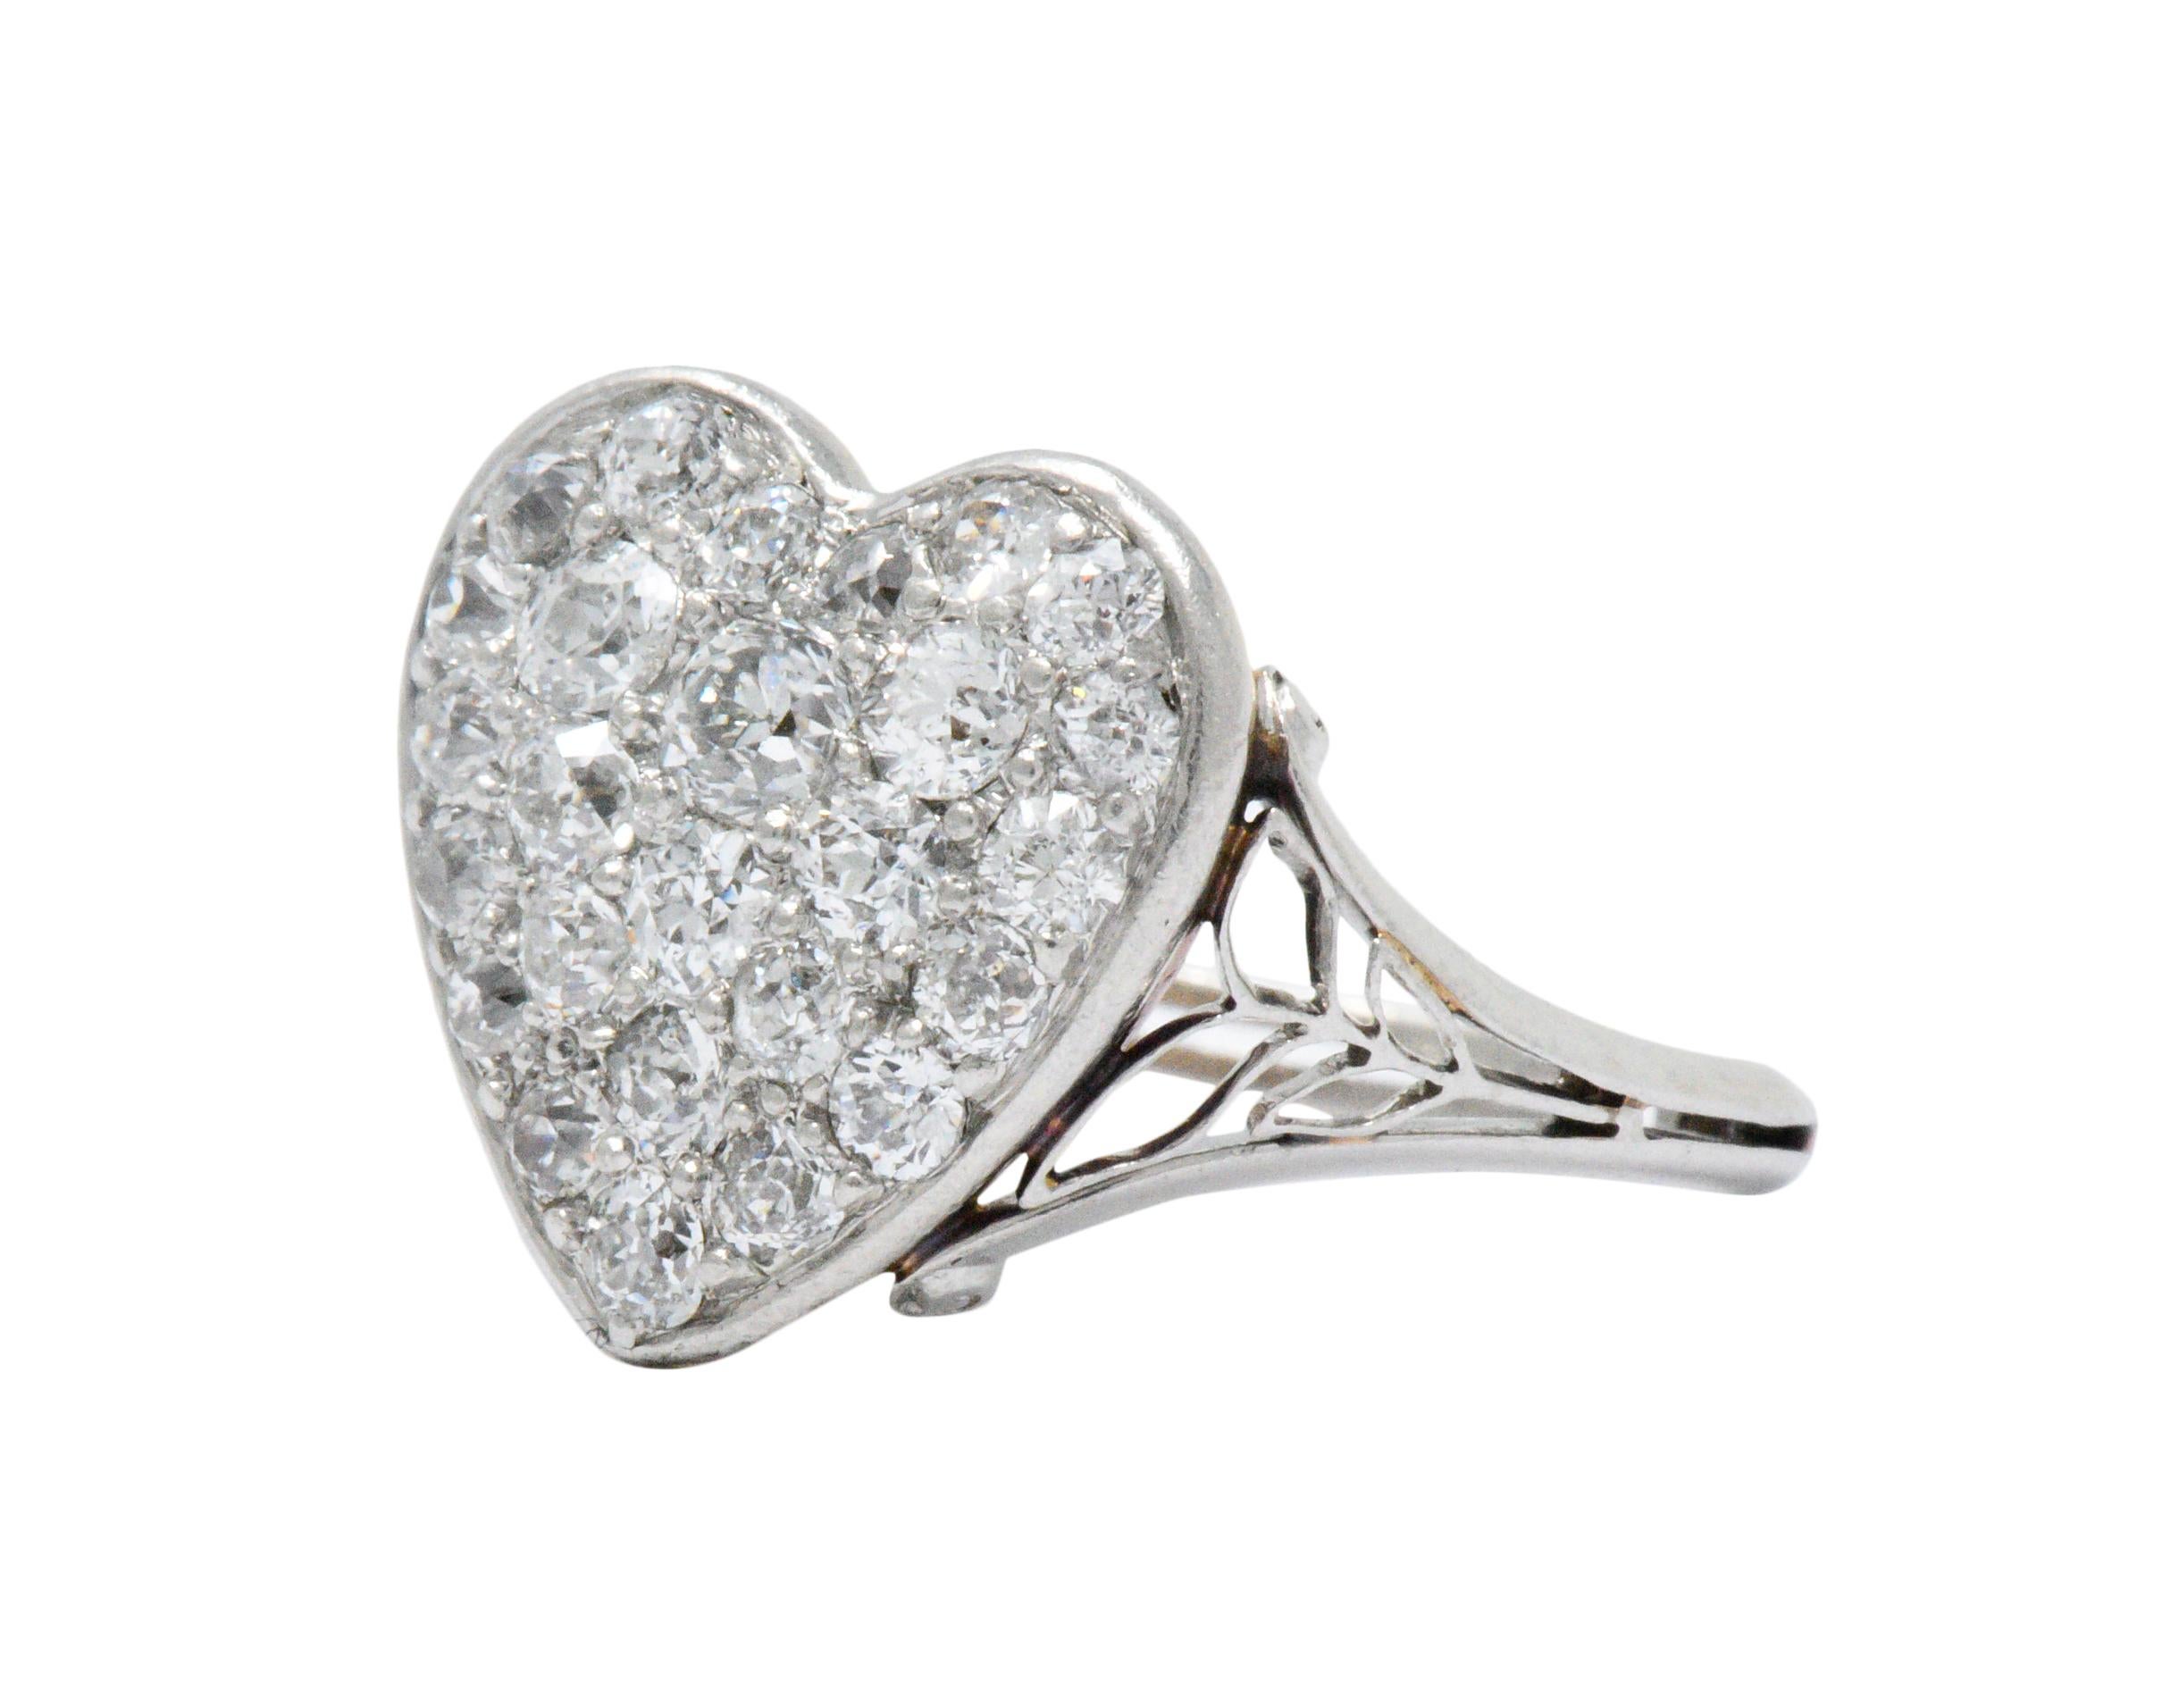 Featuring a heart shaped mount containing pavé set old European and old mine cut diamonds, weighing approximately 0.70 carats total, GHI color, VS to I clarity

Scrolled gold work with foliate motif and pieced shank

Tested as 18k gold and